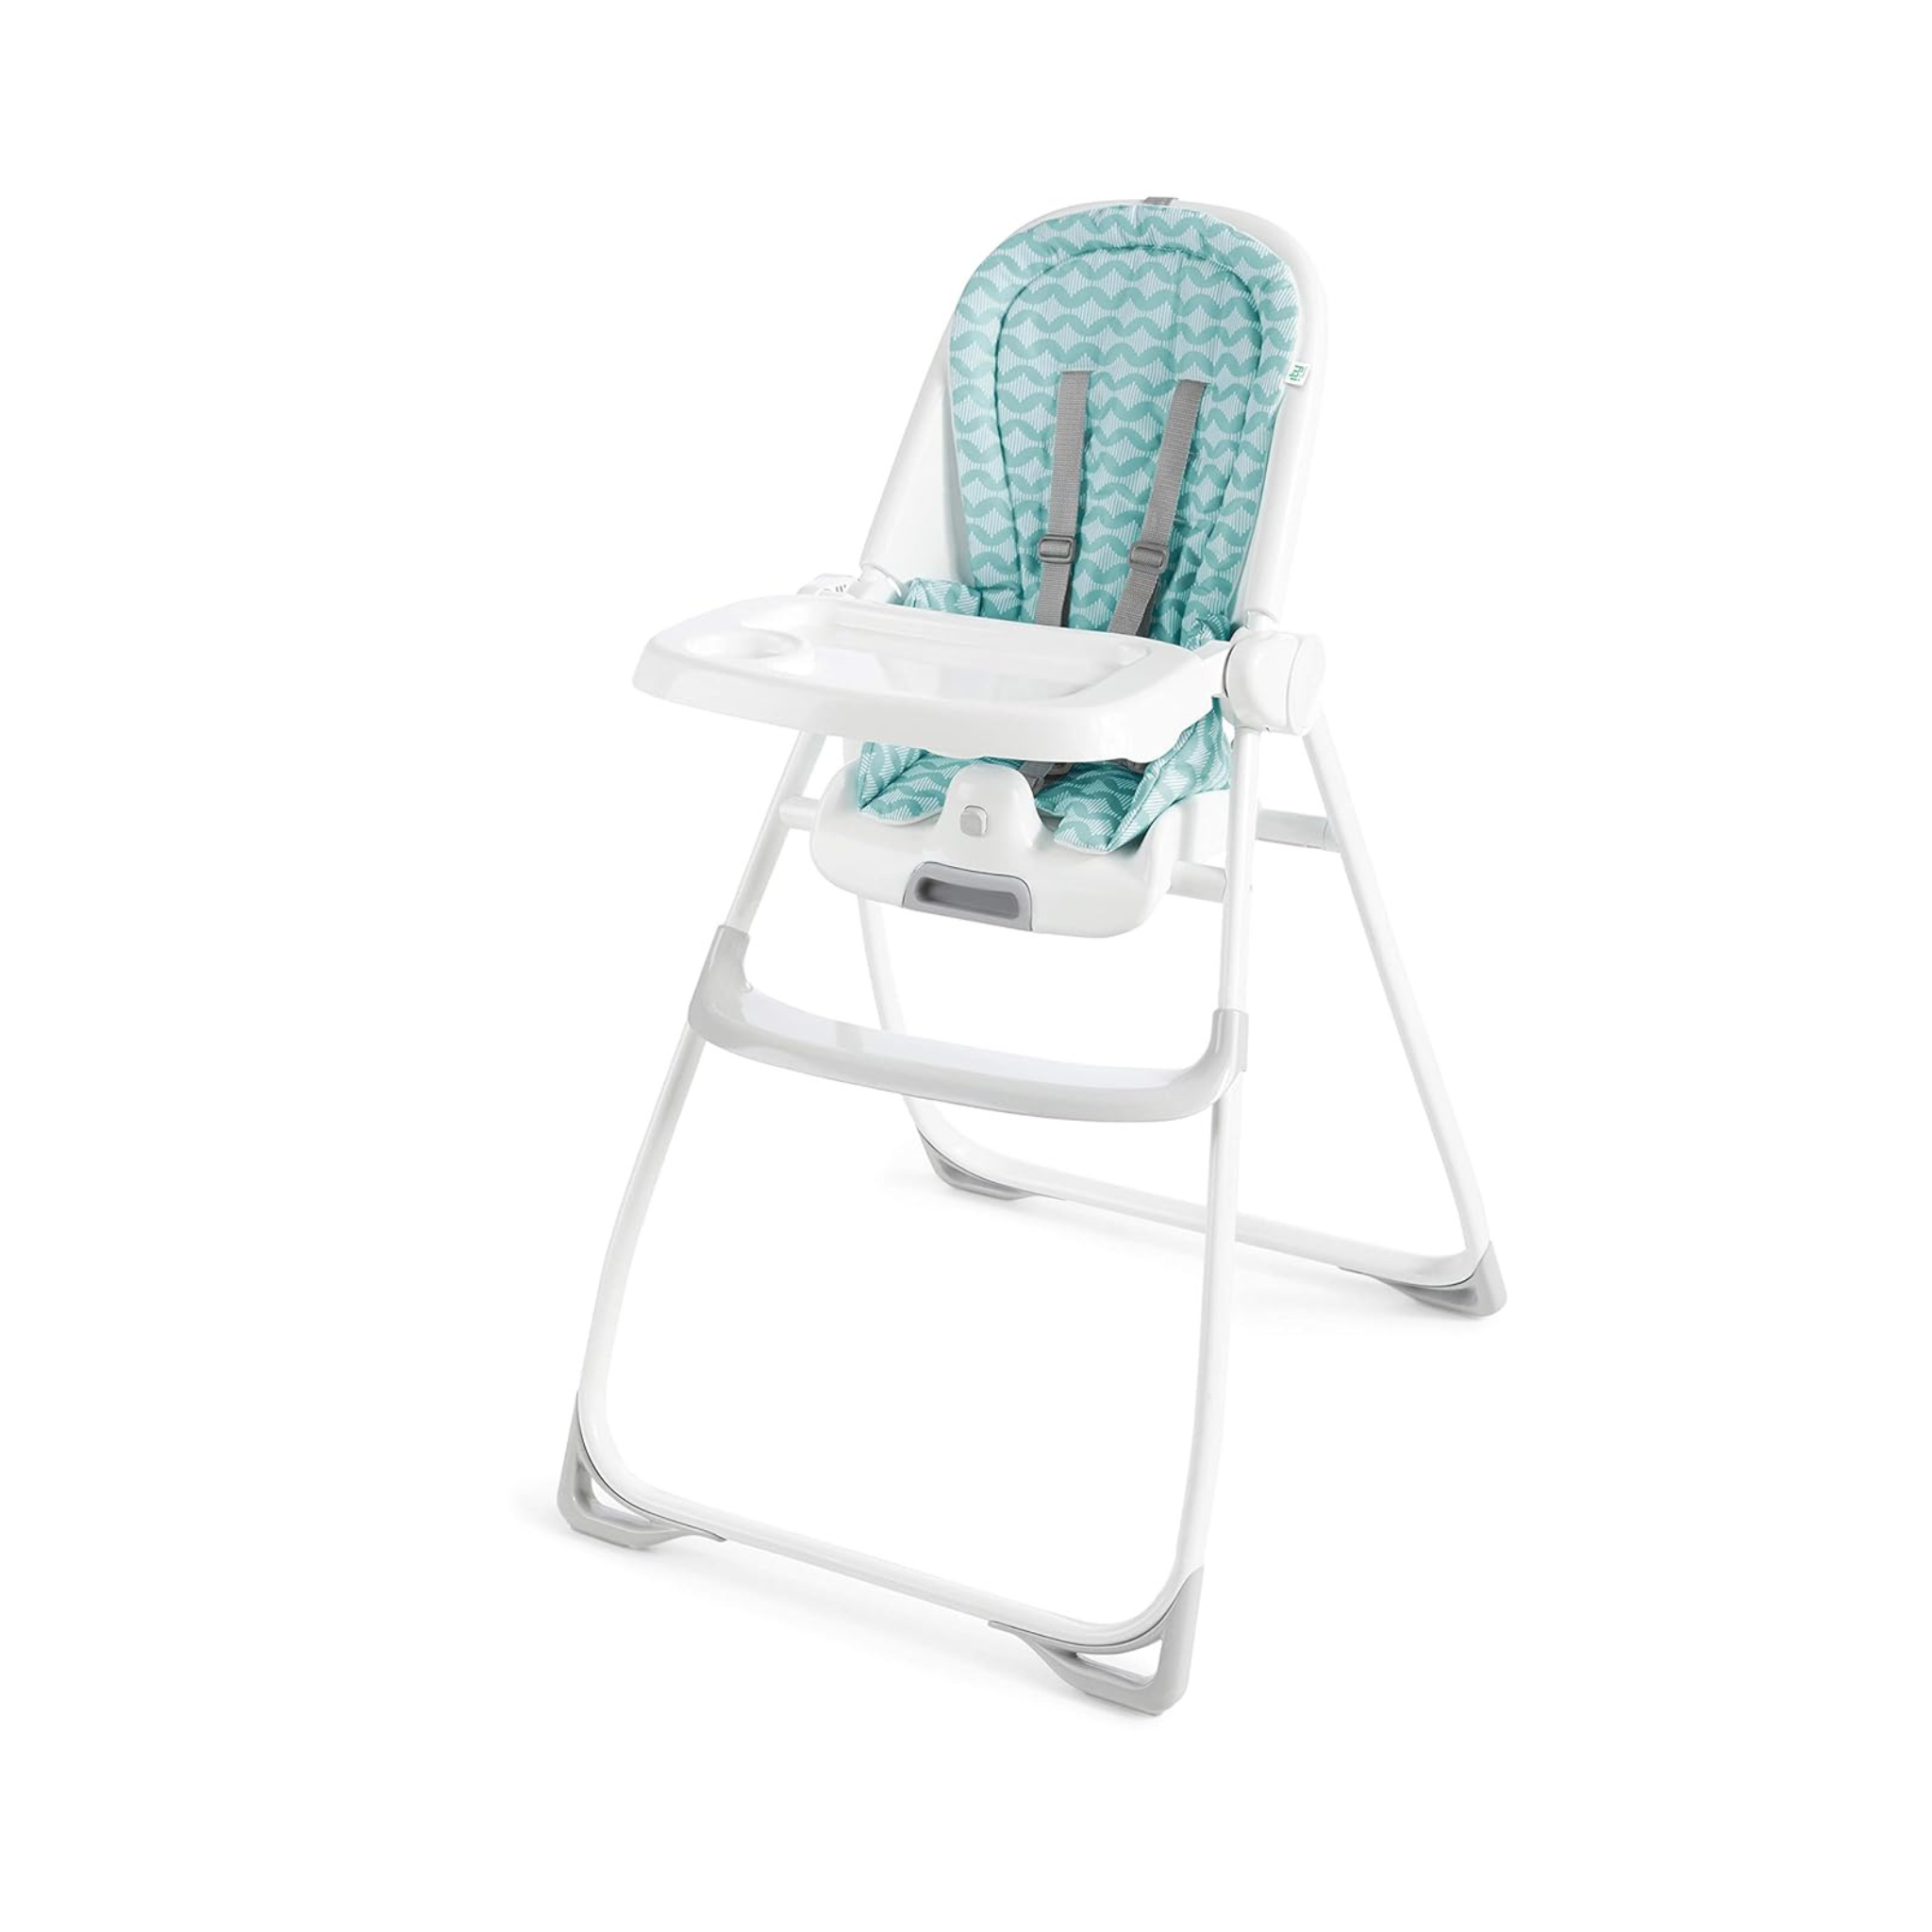 Ingenuity: ity by Ingenuity Sun Valley Compact Folding High Chair